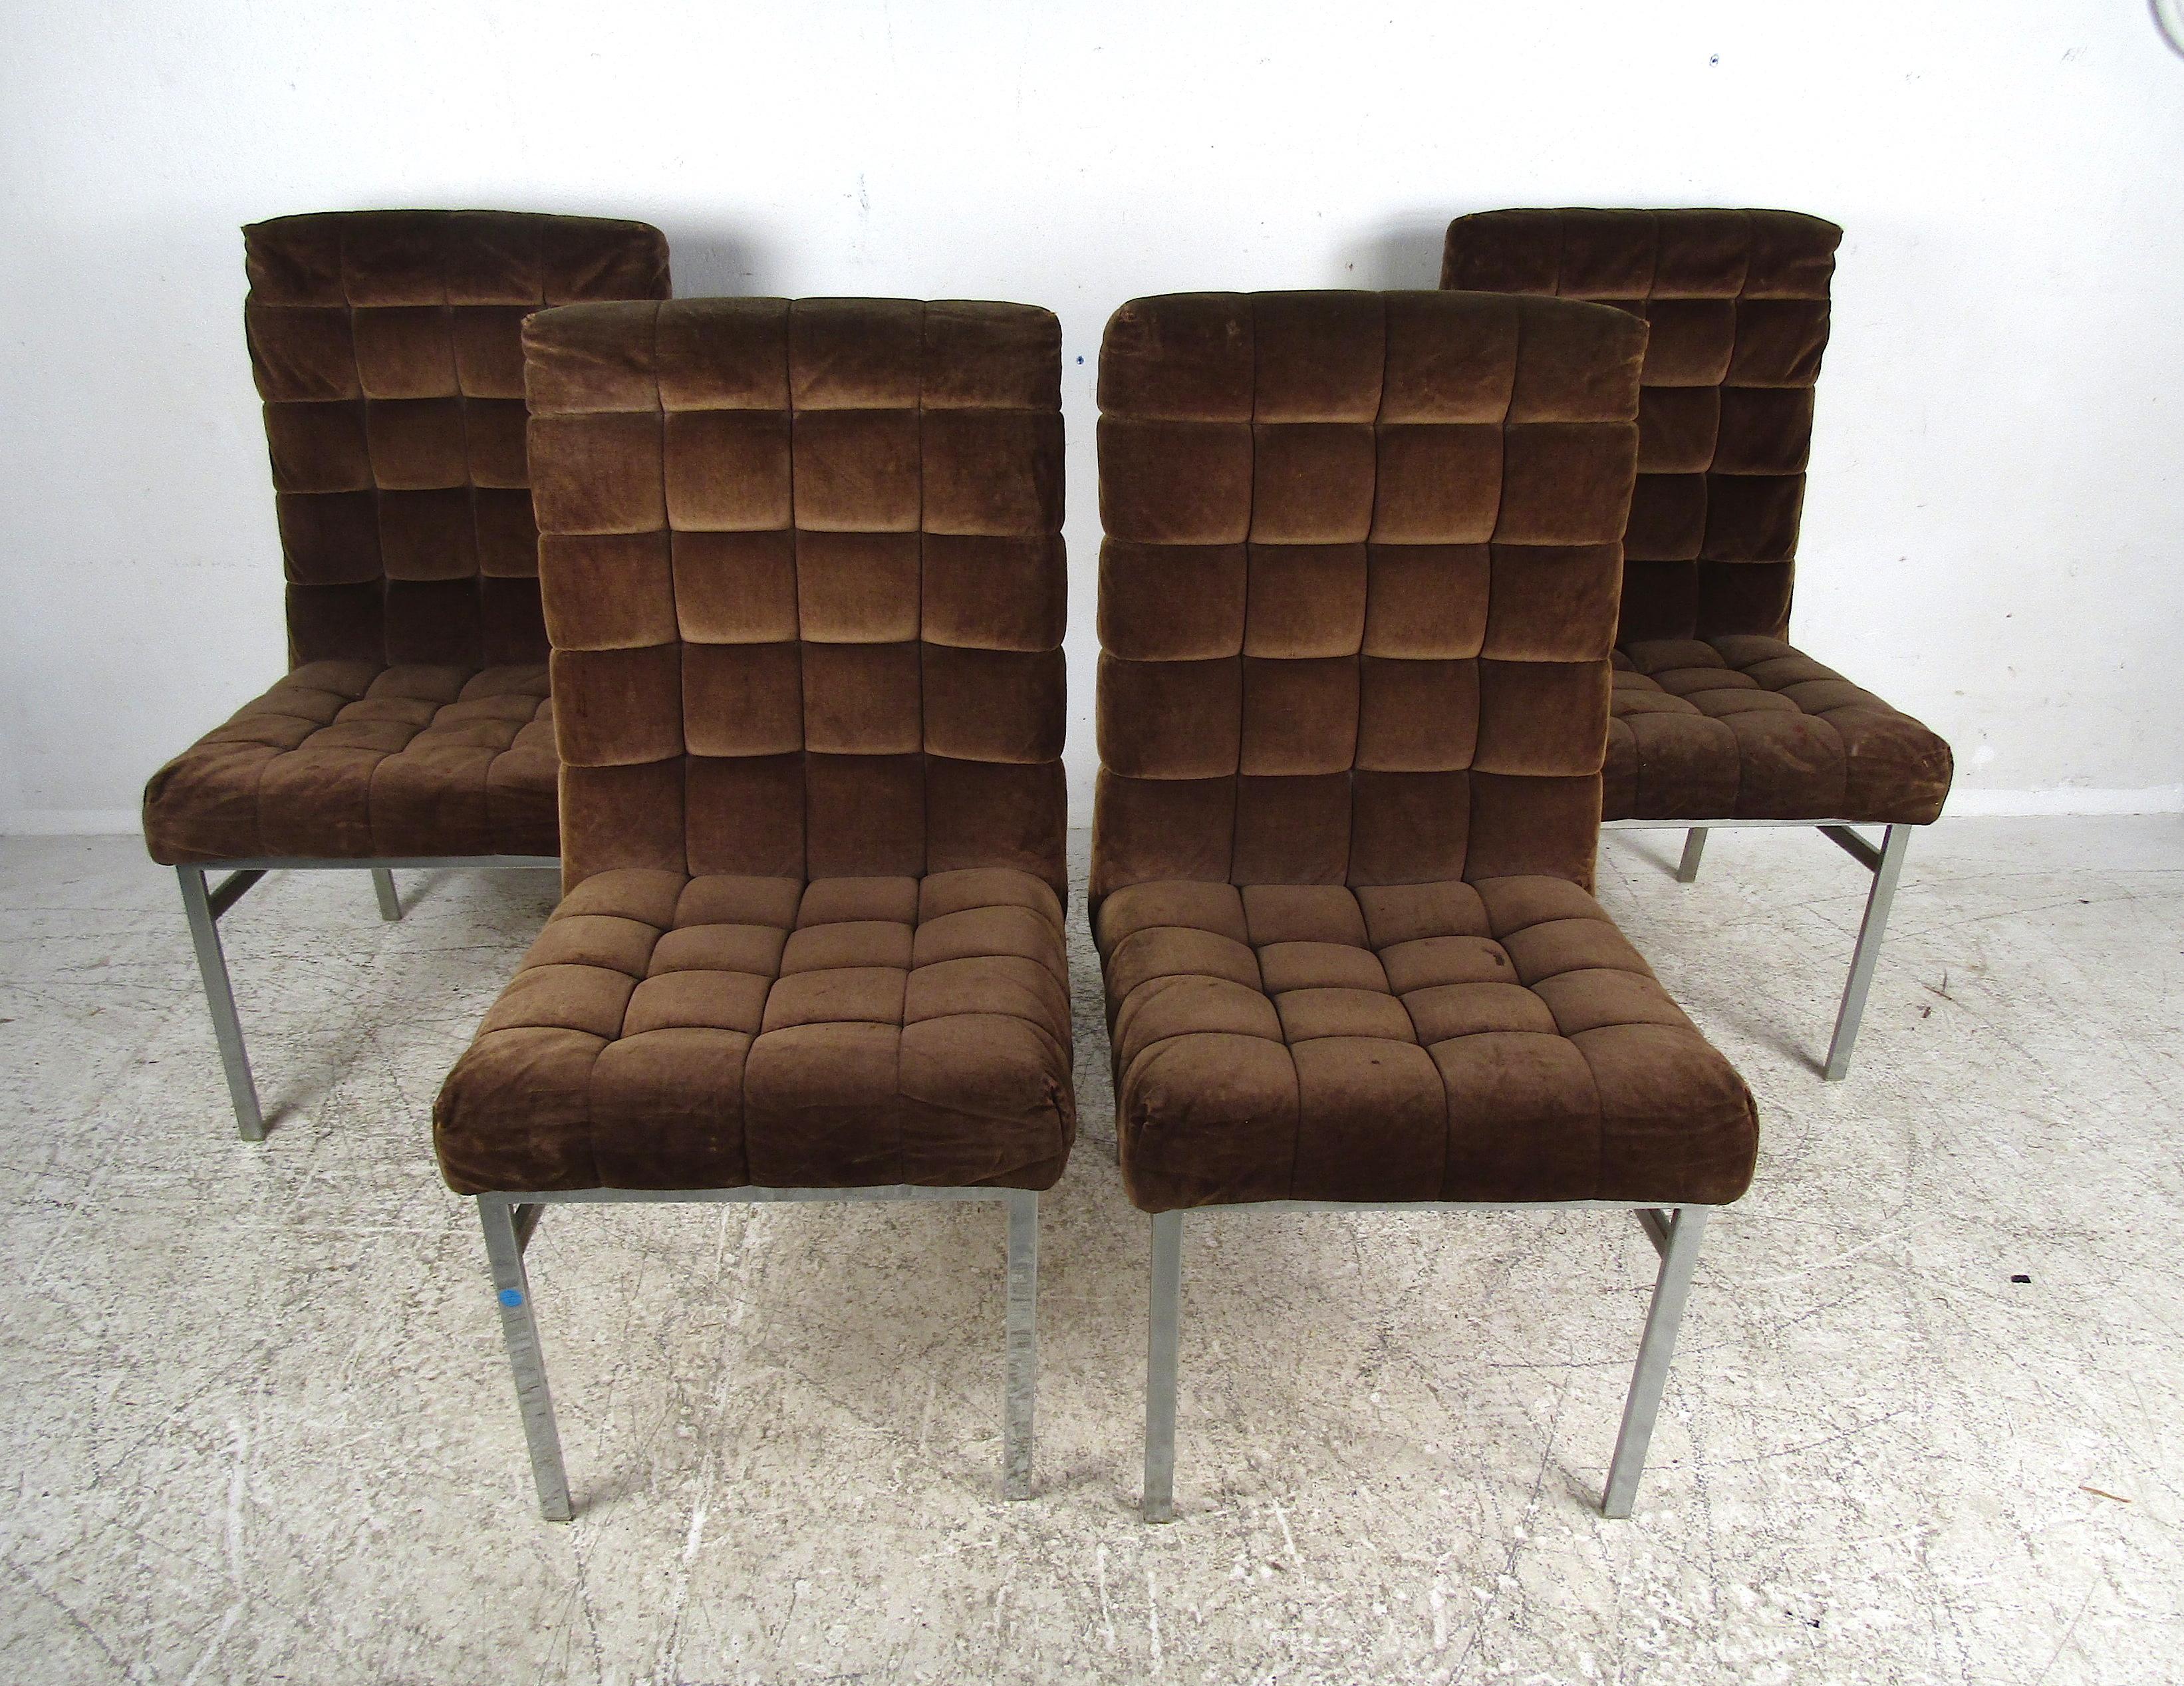 A handsome set of four midcentury dining chairs with sturdy chrome frames and a vintage brown tufted upholstery covering the seats and backrests. Please confirm the item's location with the dealer (NJ or NY).